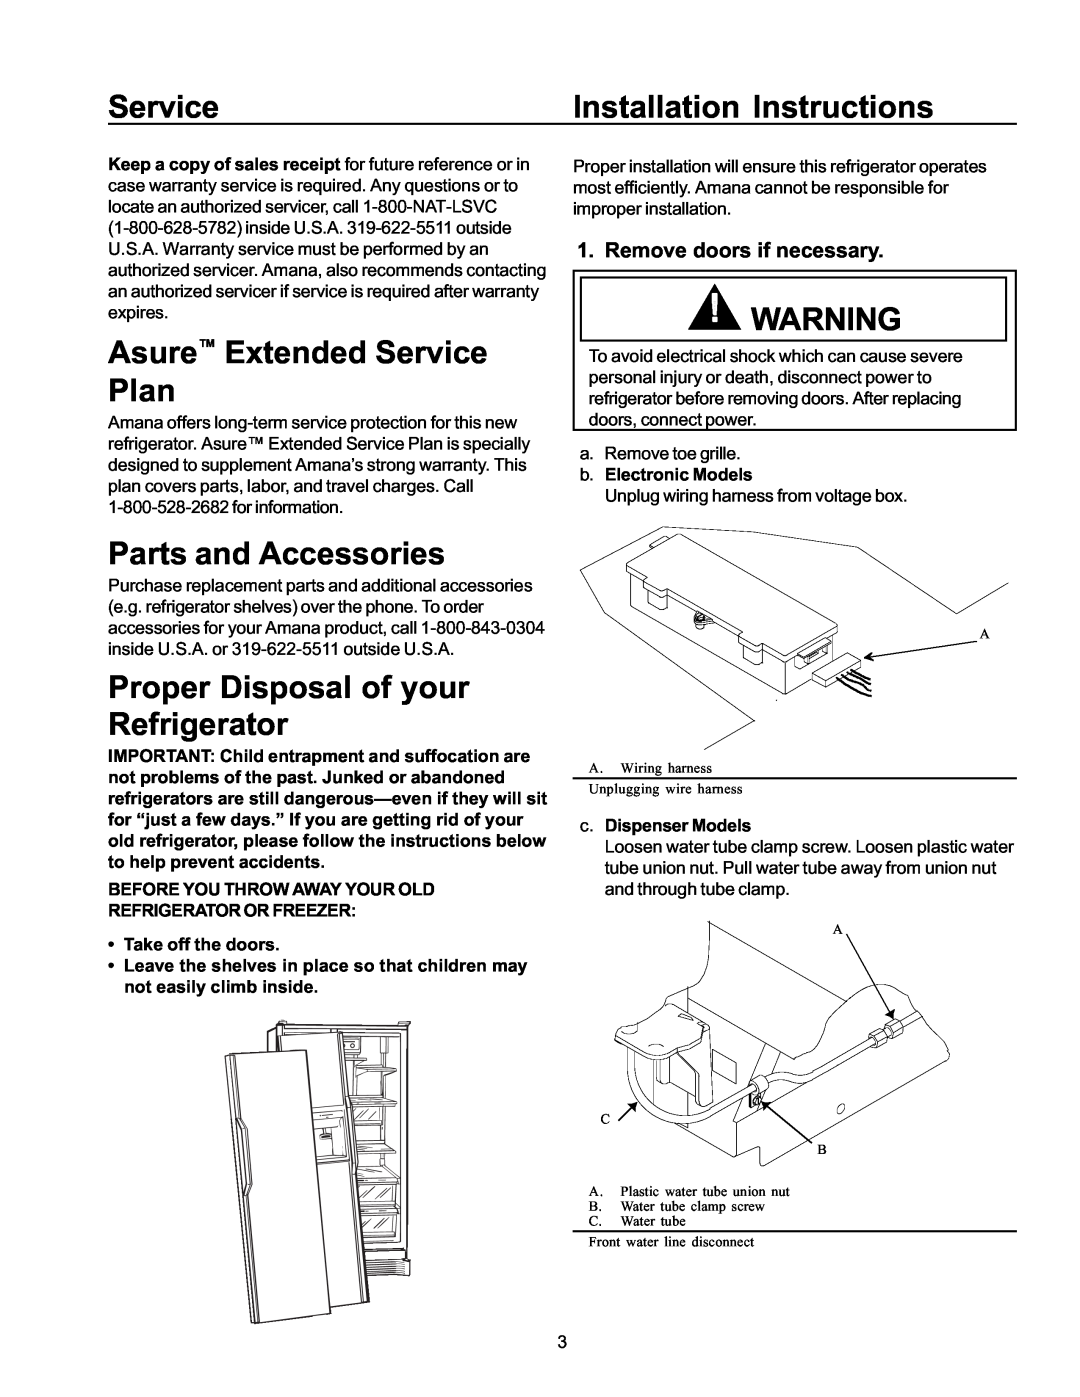 Amana SBD21VE Installation Instructions, Asure Extended Service Plan, Parts and Accessories, Remove doors if necessary 